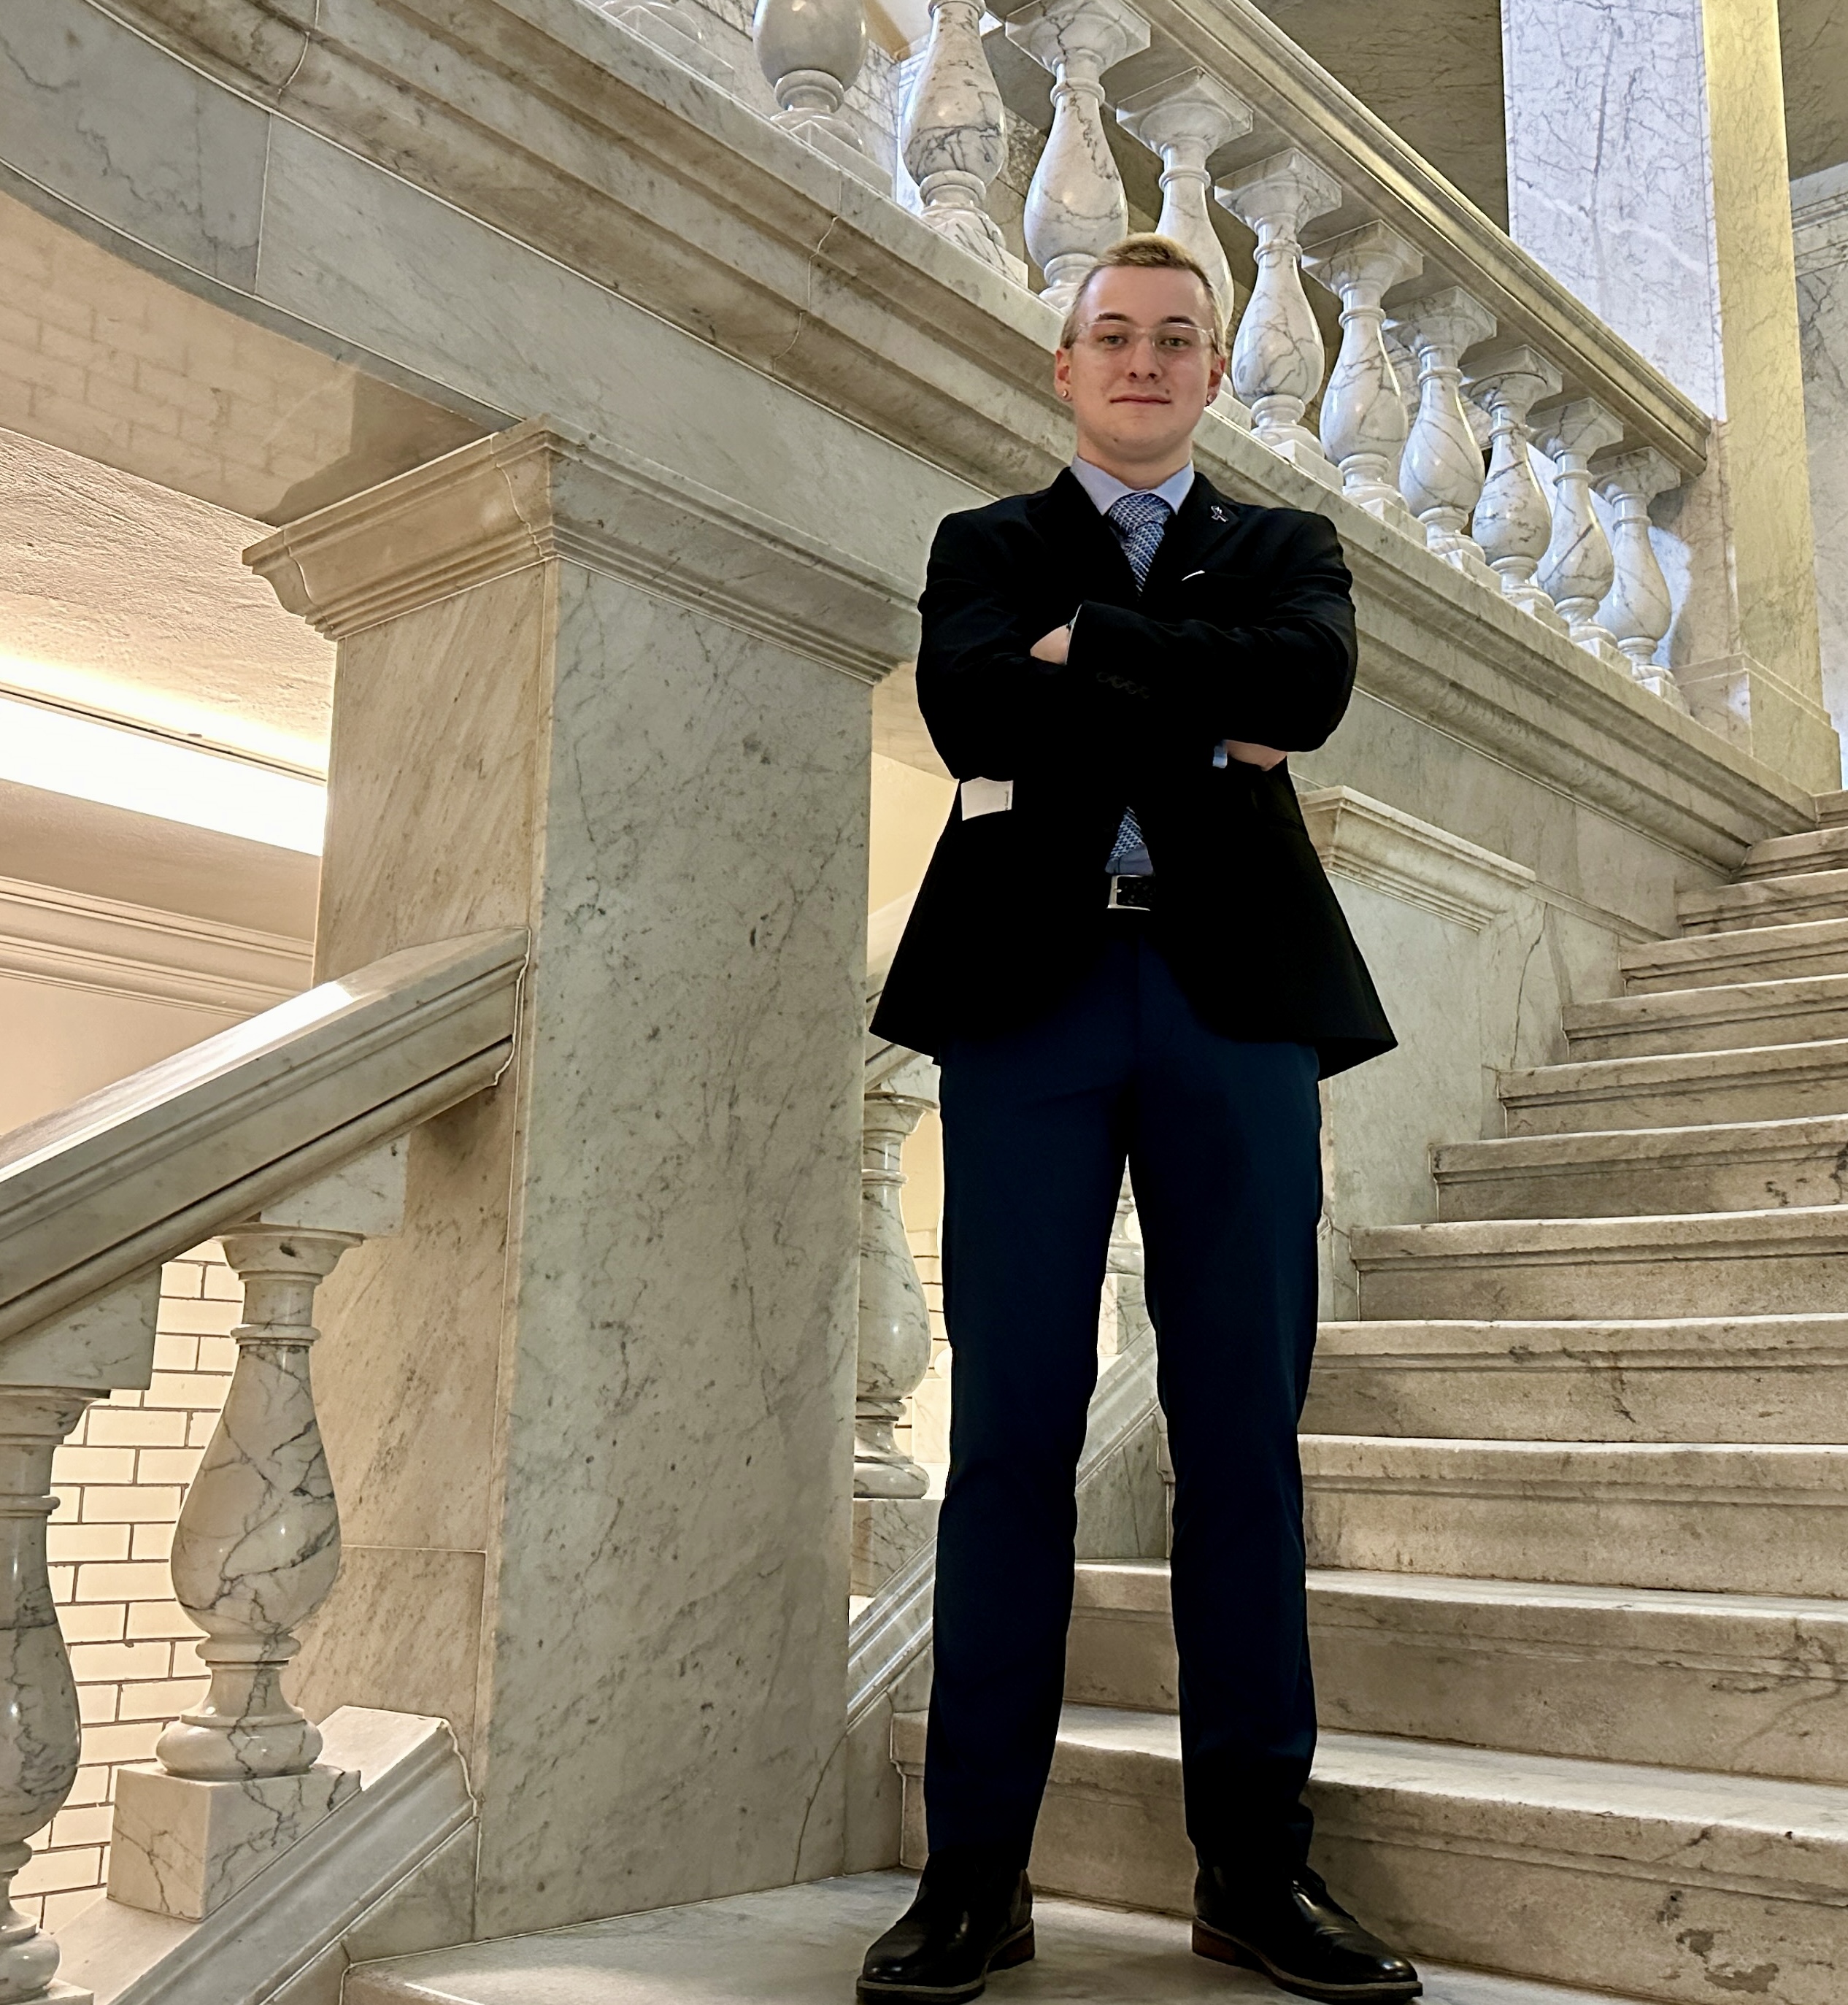 High school senior Jackson Taylor, who runs a student task force on drug and opioid issues in Montgomery County, stands inside the State Capitol in Annapolis on March 5, 2024. The 18-year-old is advocating for students to carry the overdose-reversing medication naloxone on school grounds. (Sapna Bansil/Capital News Service)